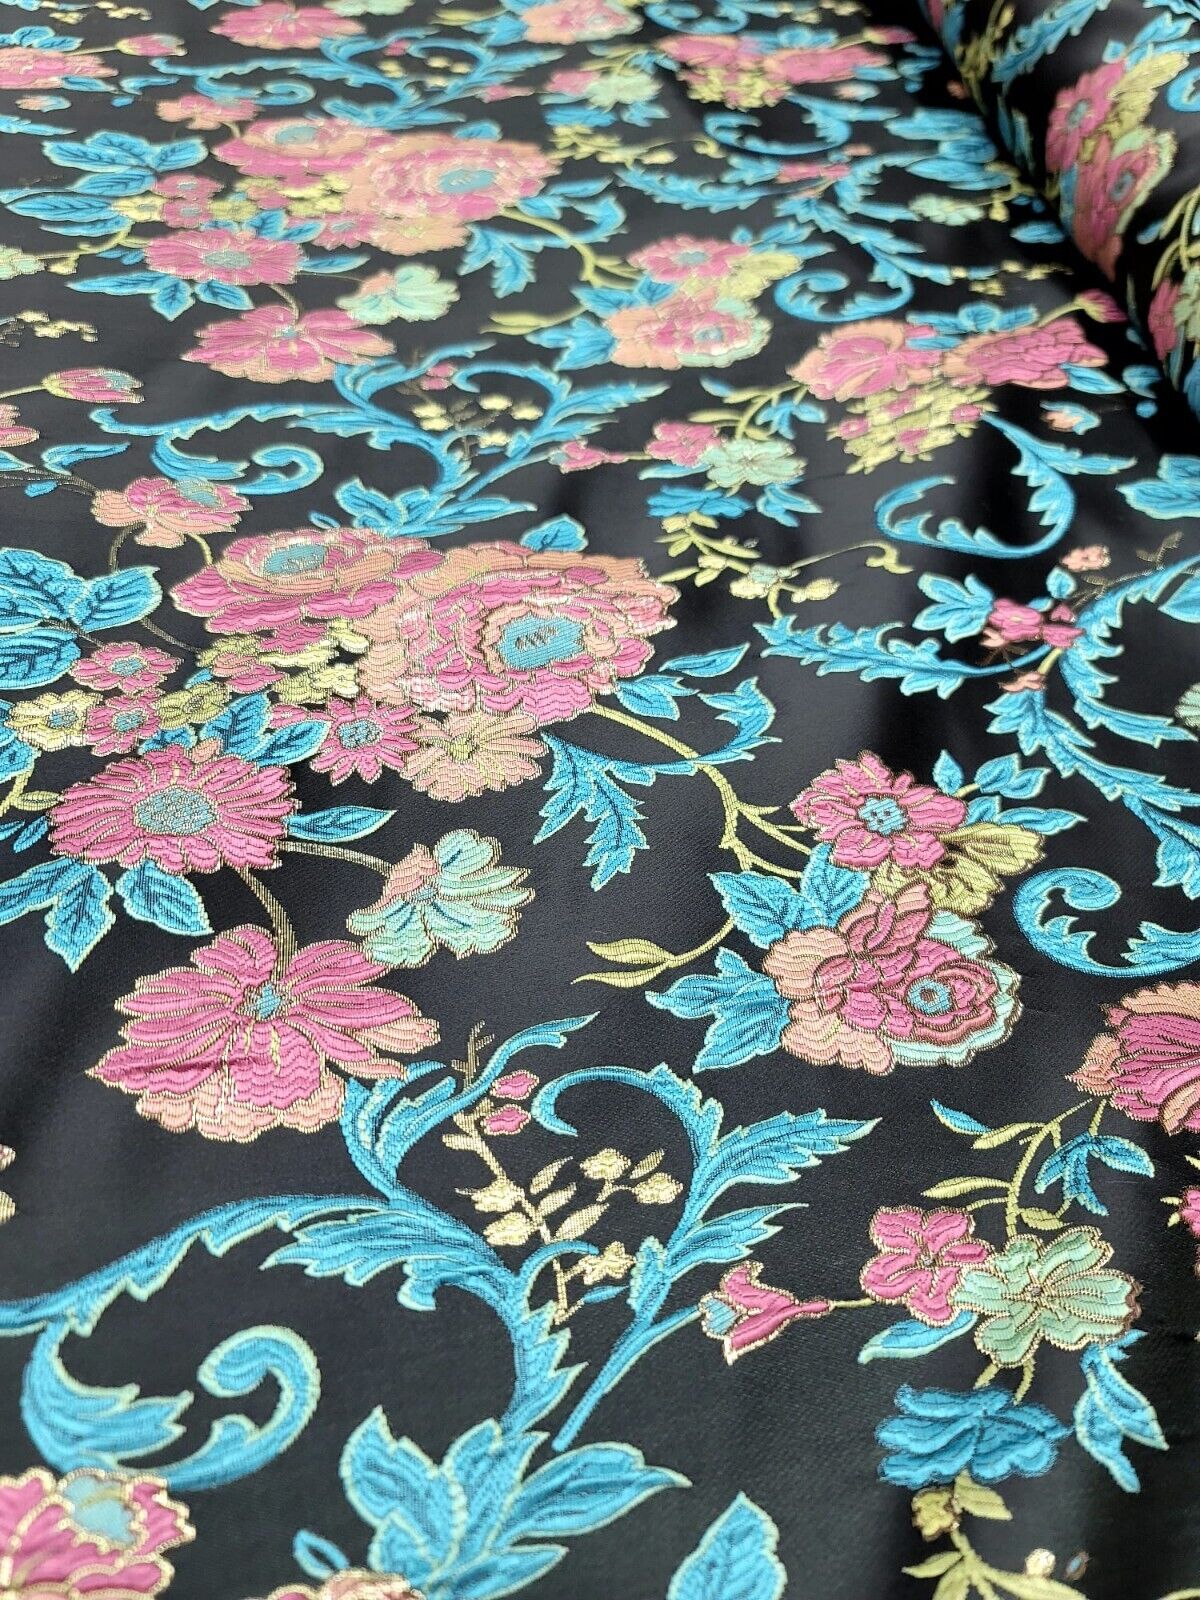 Vtg Brocade Upholstery Fabric By The Yard Green Fuchsia Blue Floral For Dress